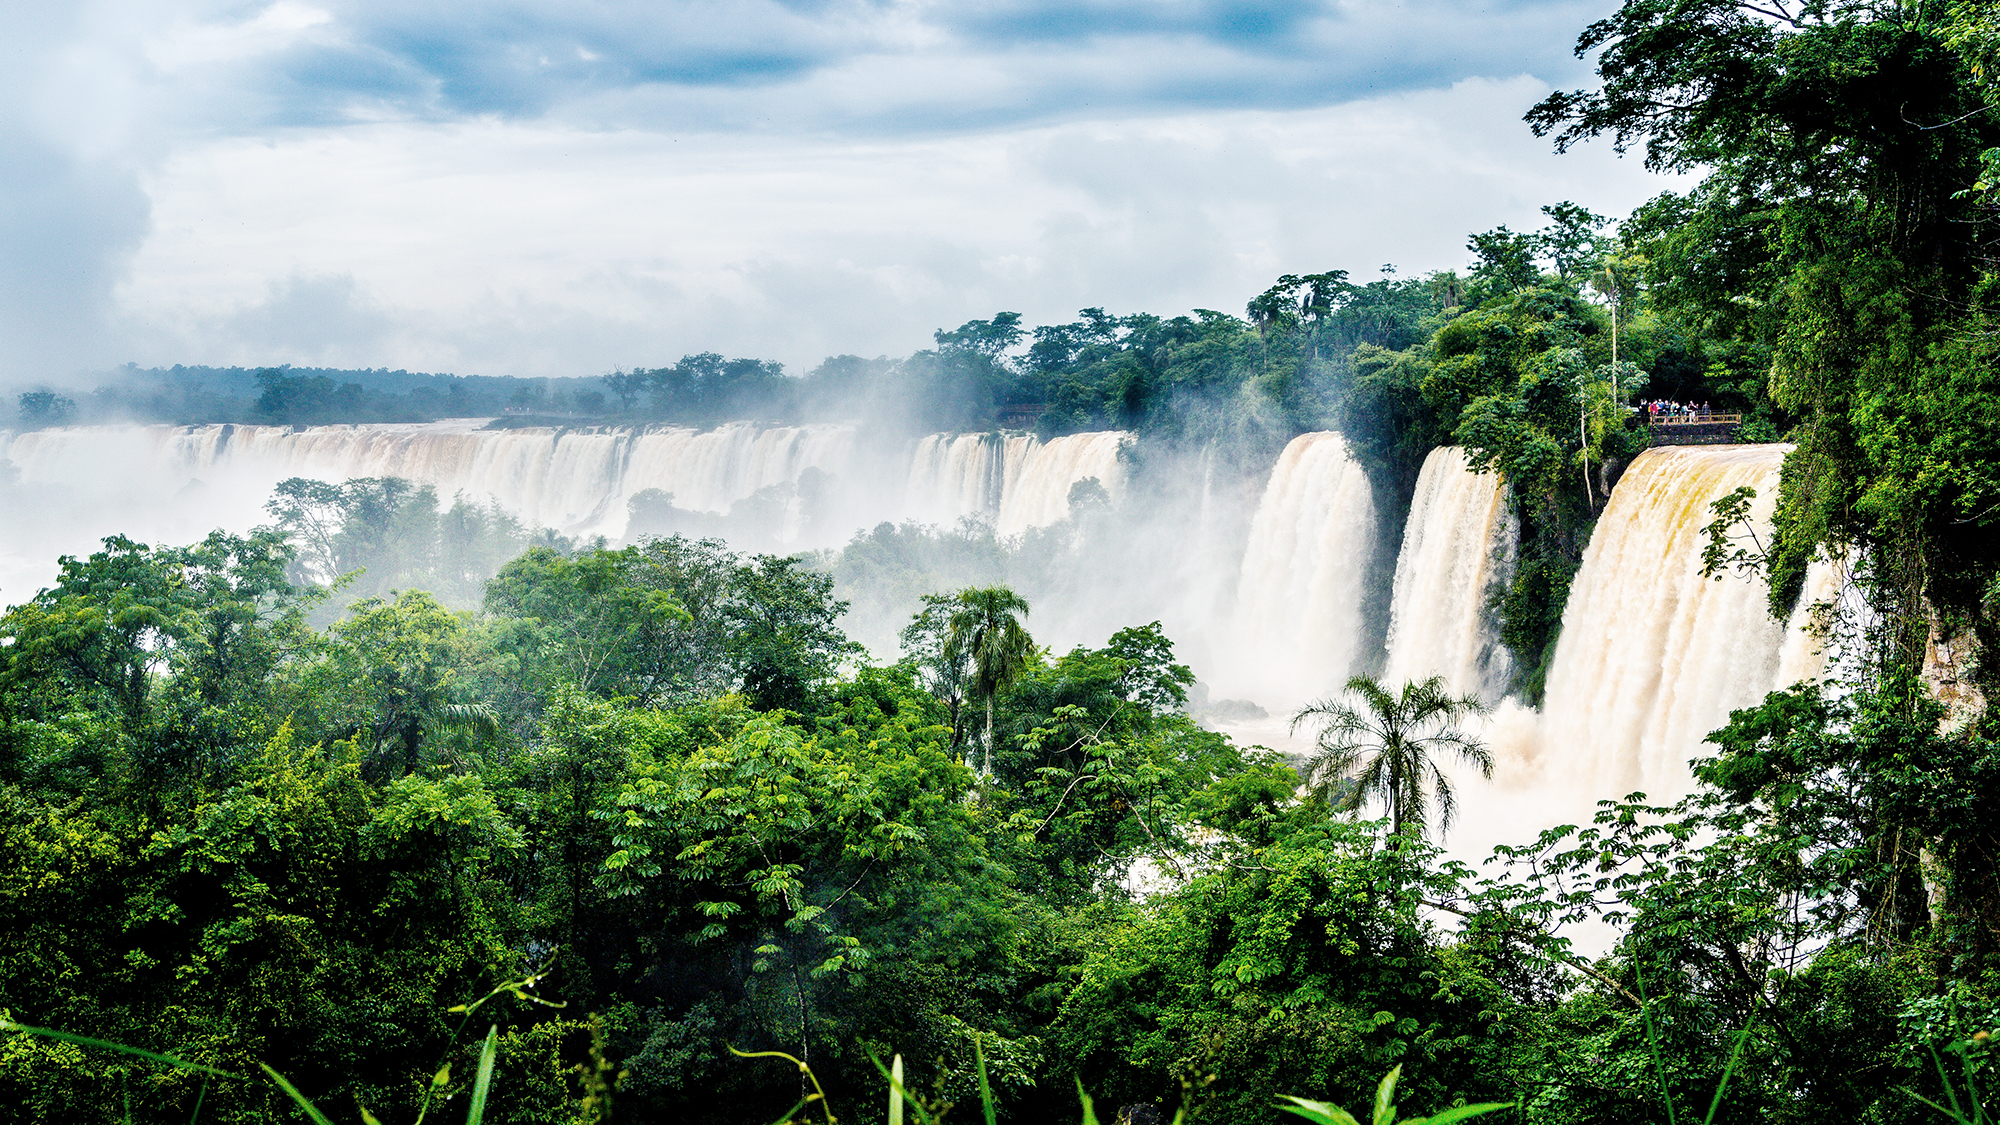 The waterfall at Iguazu National Park surrounded by forests covered in the fog under a cloudy sky